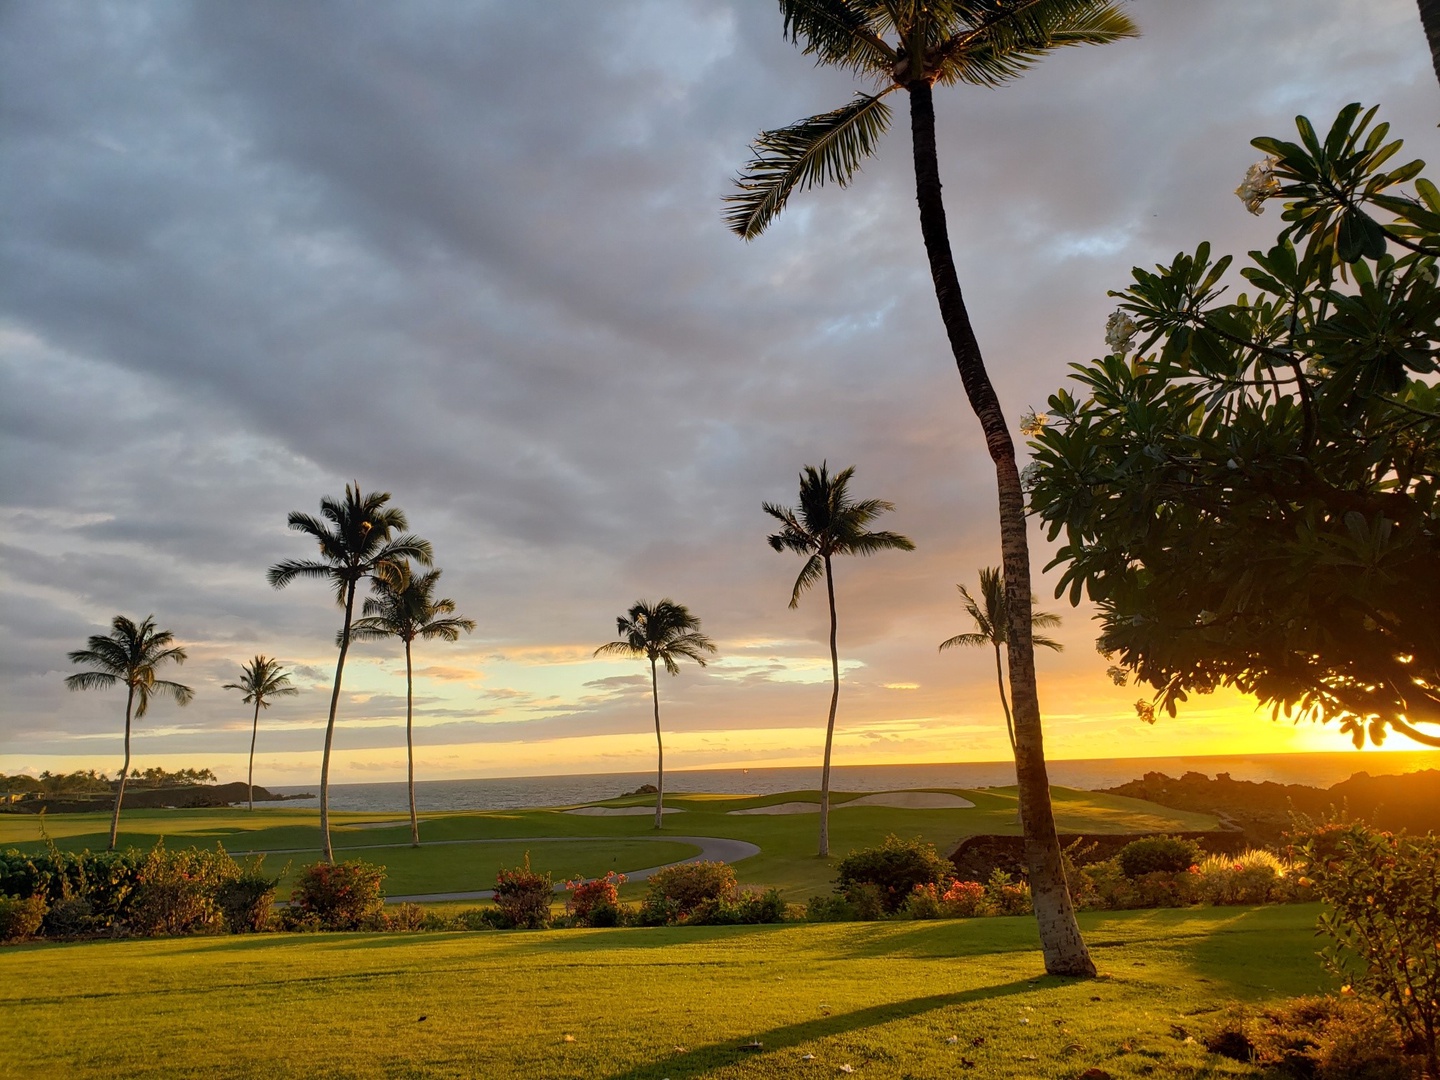 Kamuela Vacation Rentals, Mauna Lani Point E105 - As each evening comes to dusk the colors star to show.